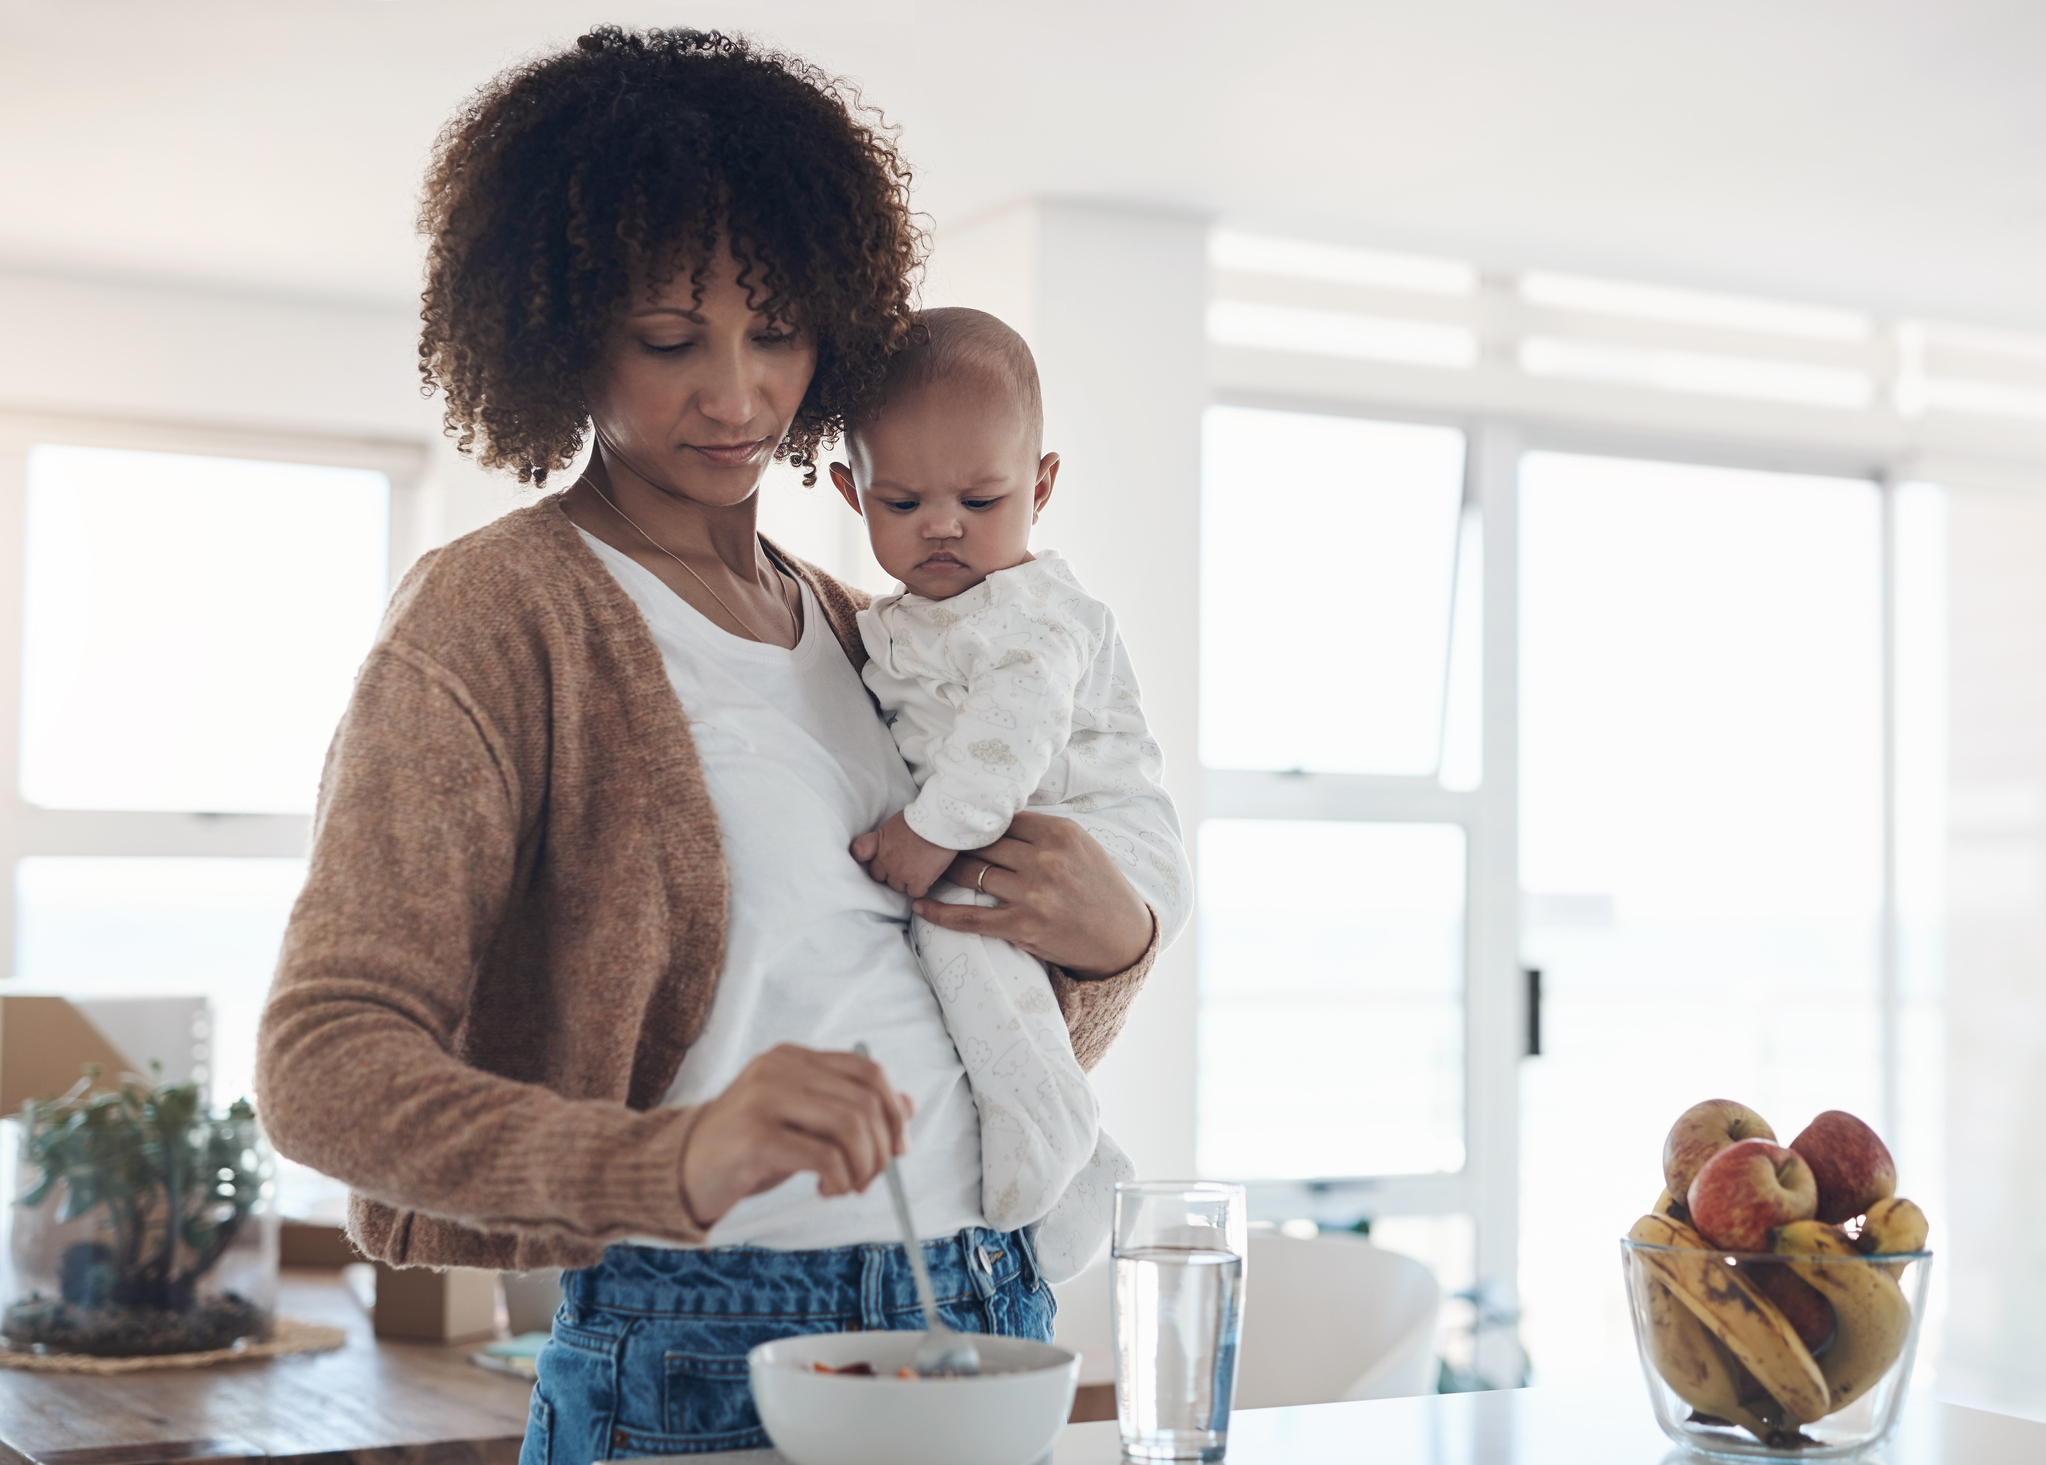 New Moms: Caring for Yourself During Postpartum